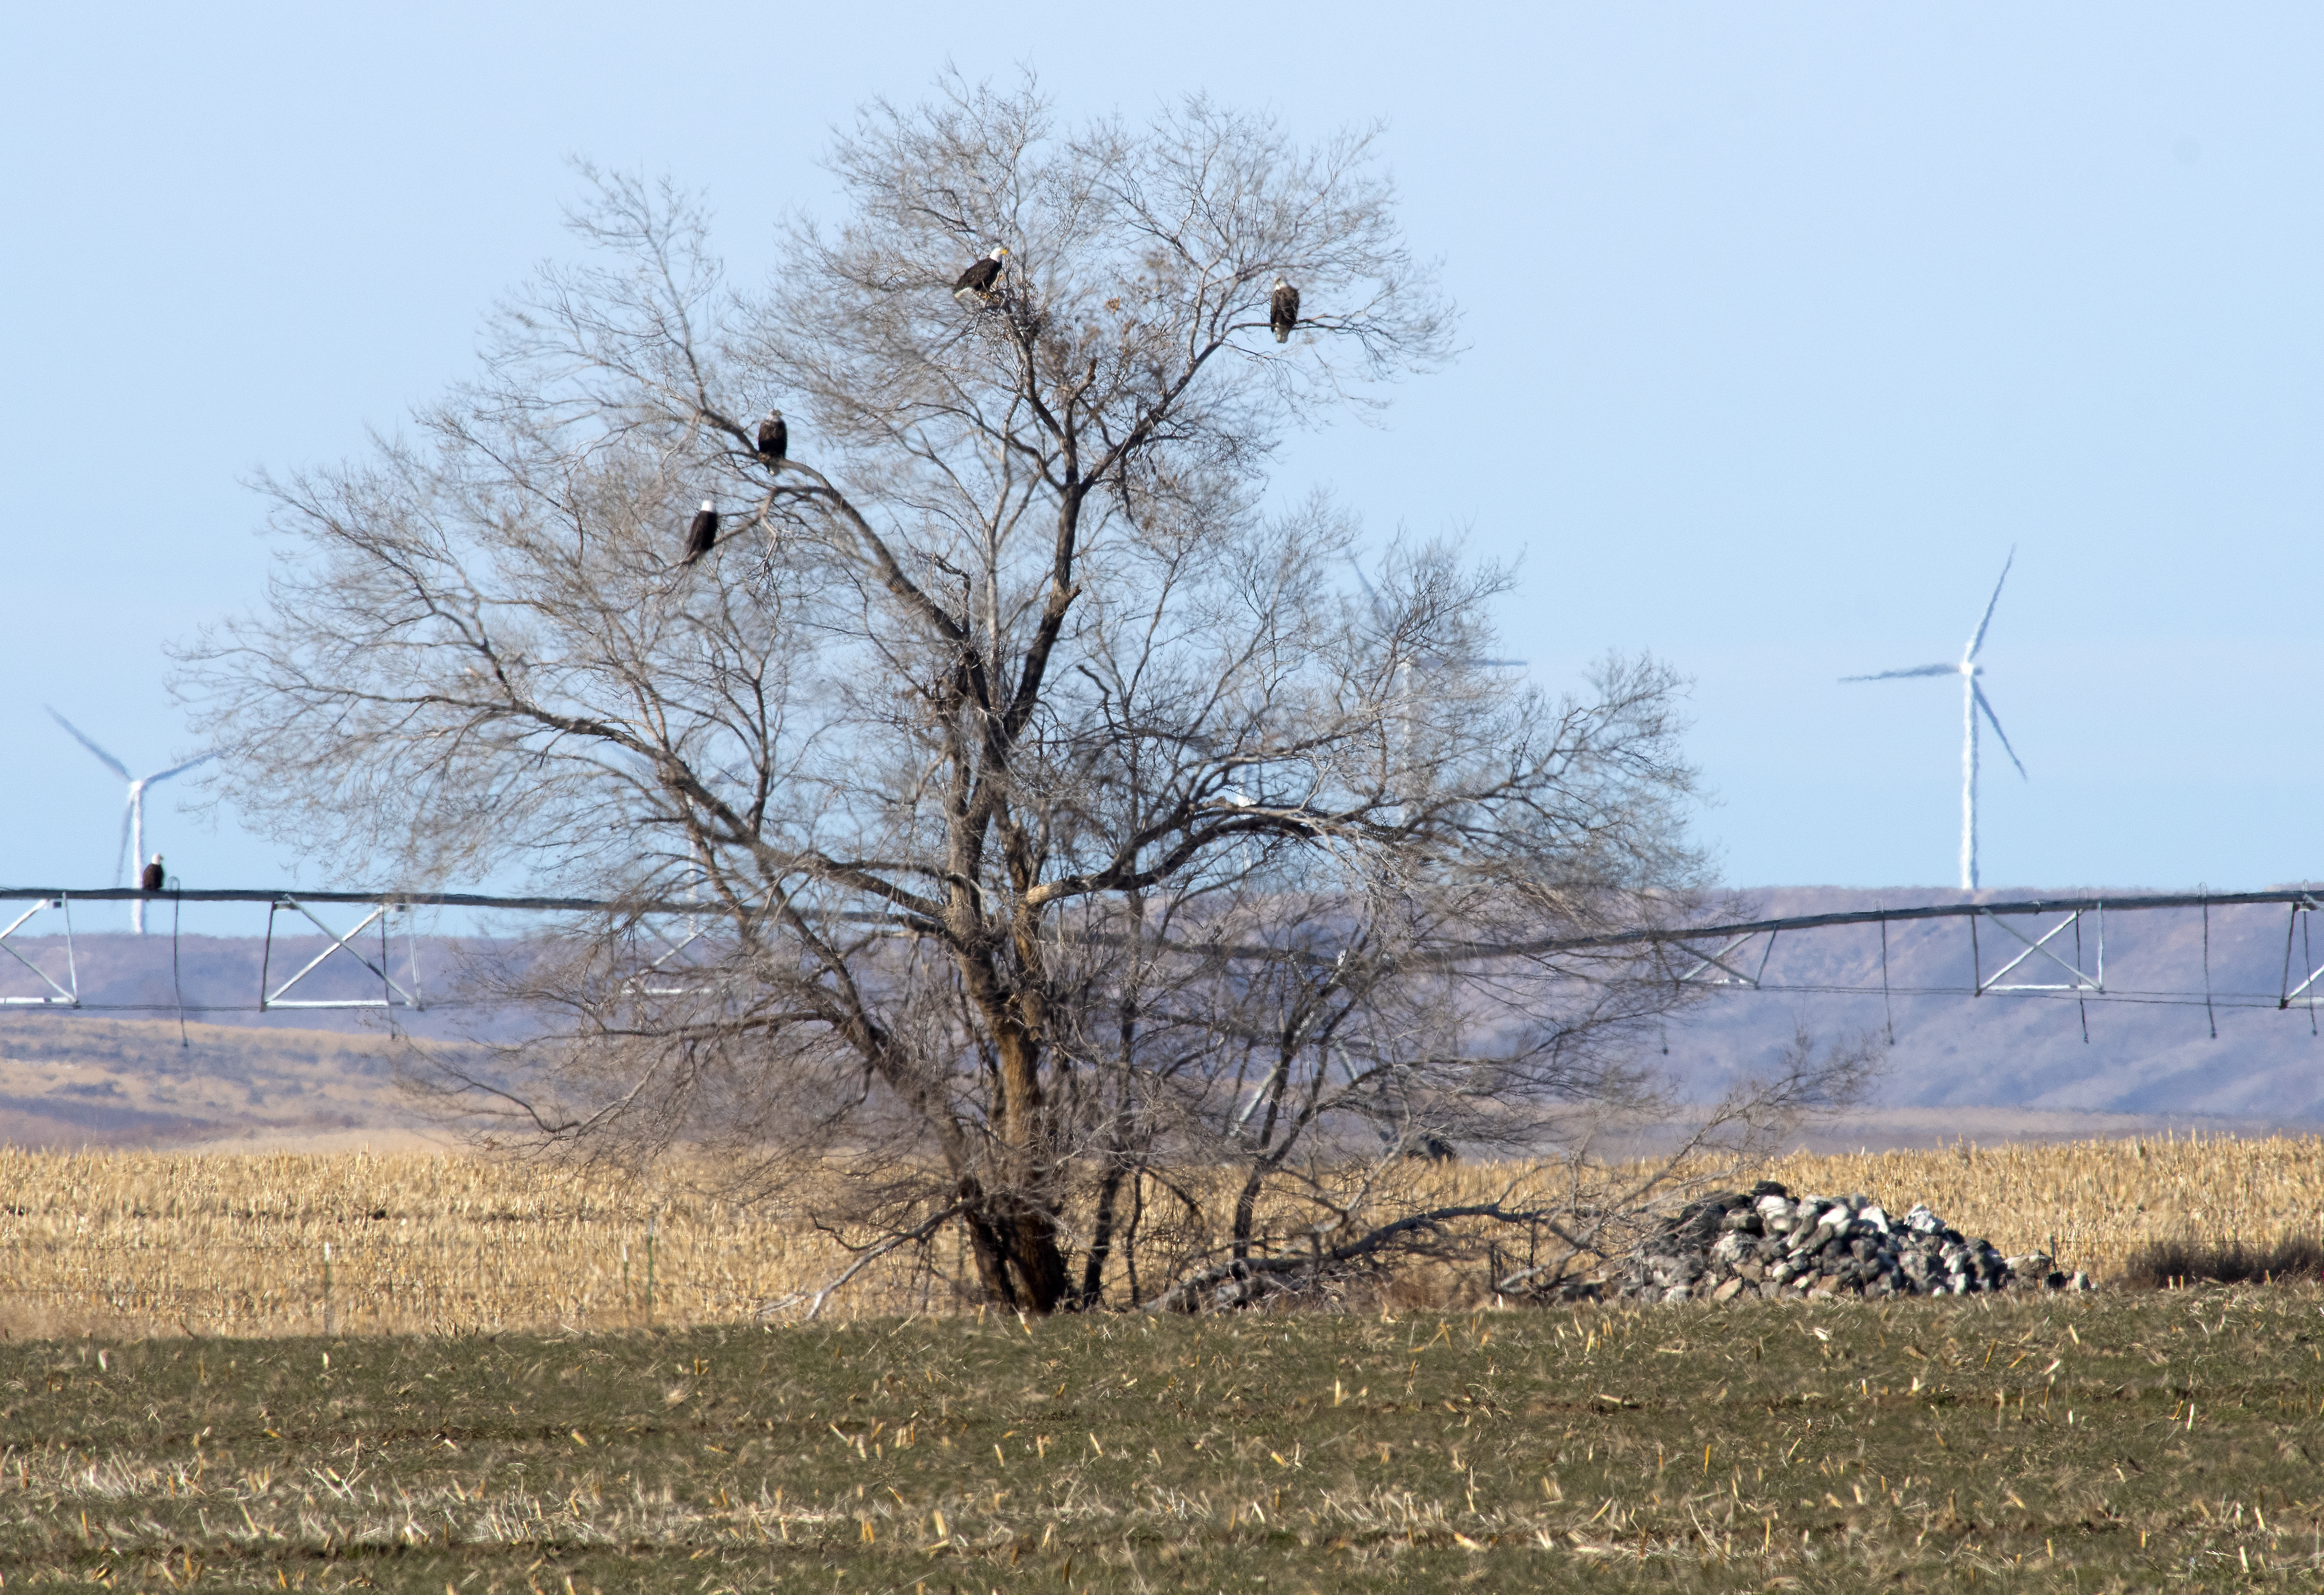 Bald Eagles perch in a tree in front of a wind facility in Idaho